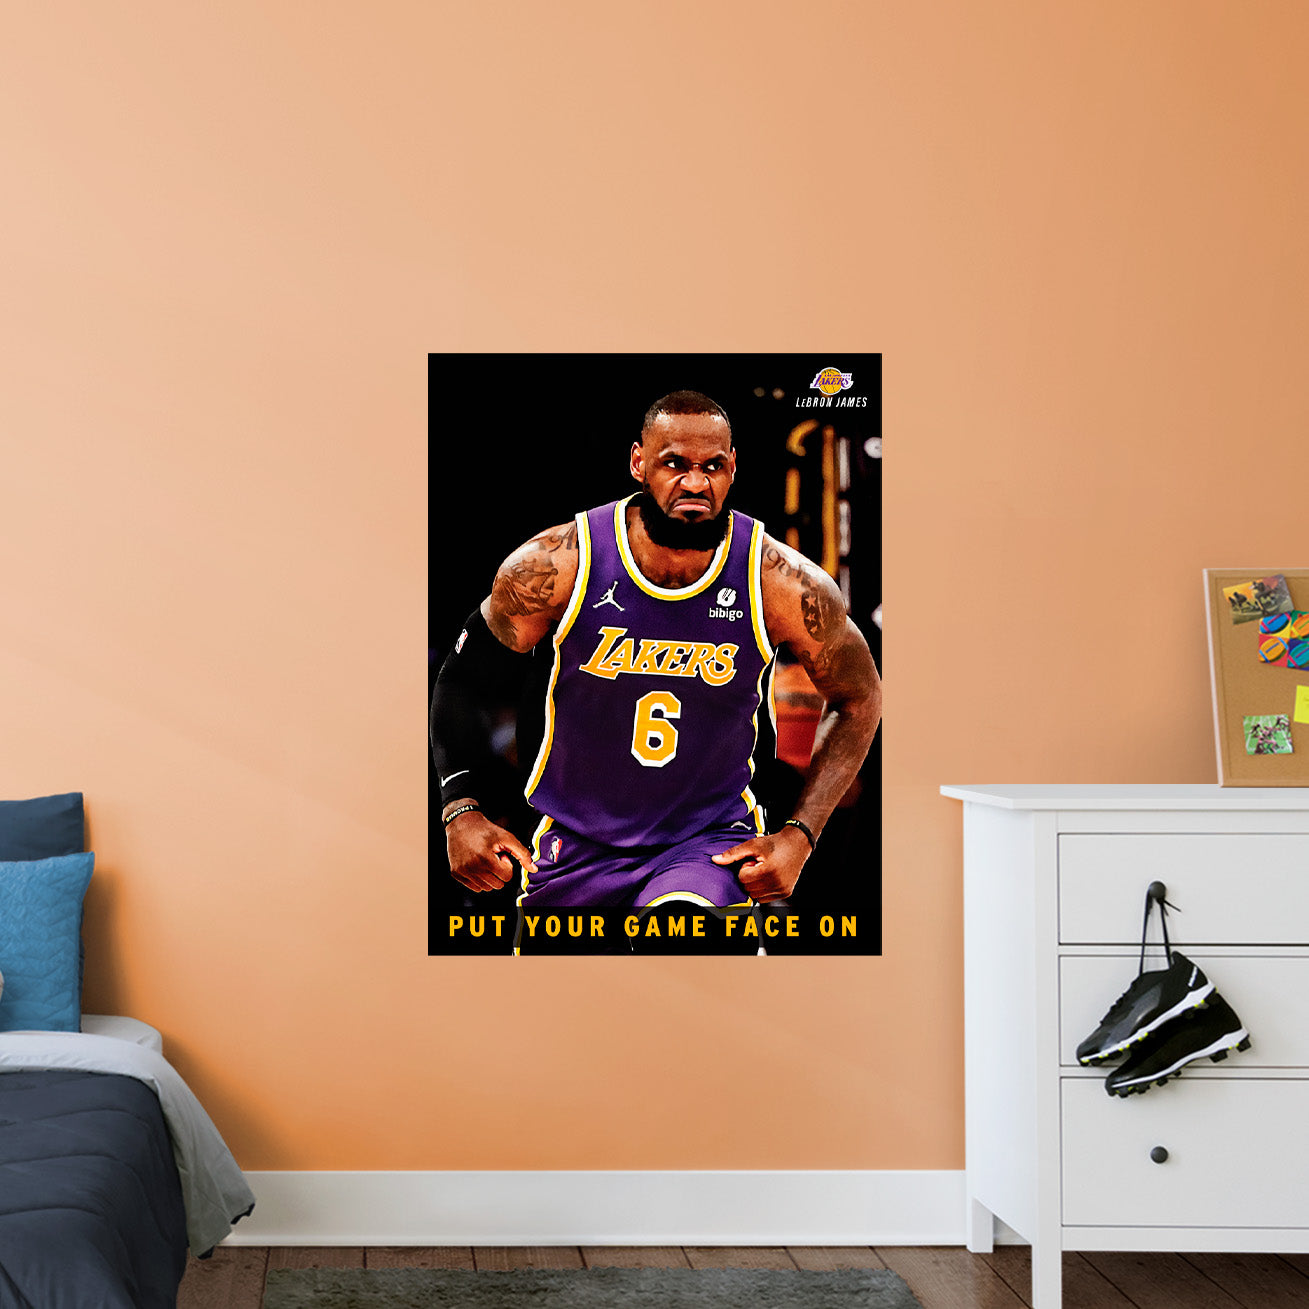 Fathead NBA Los Angeles Lakers LeBron James LeBron James- Officially Licensed Removable Wall Decal